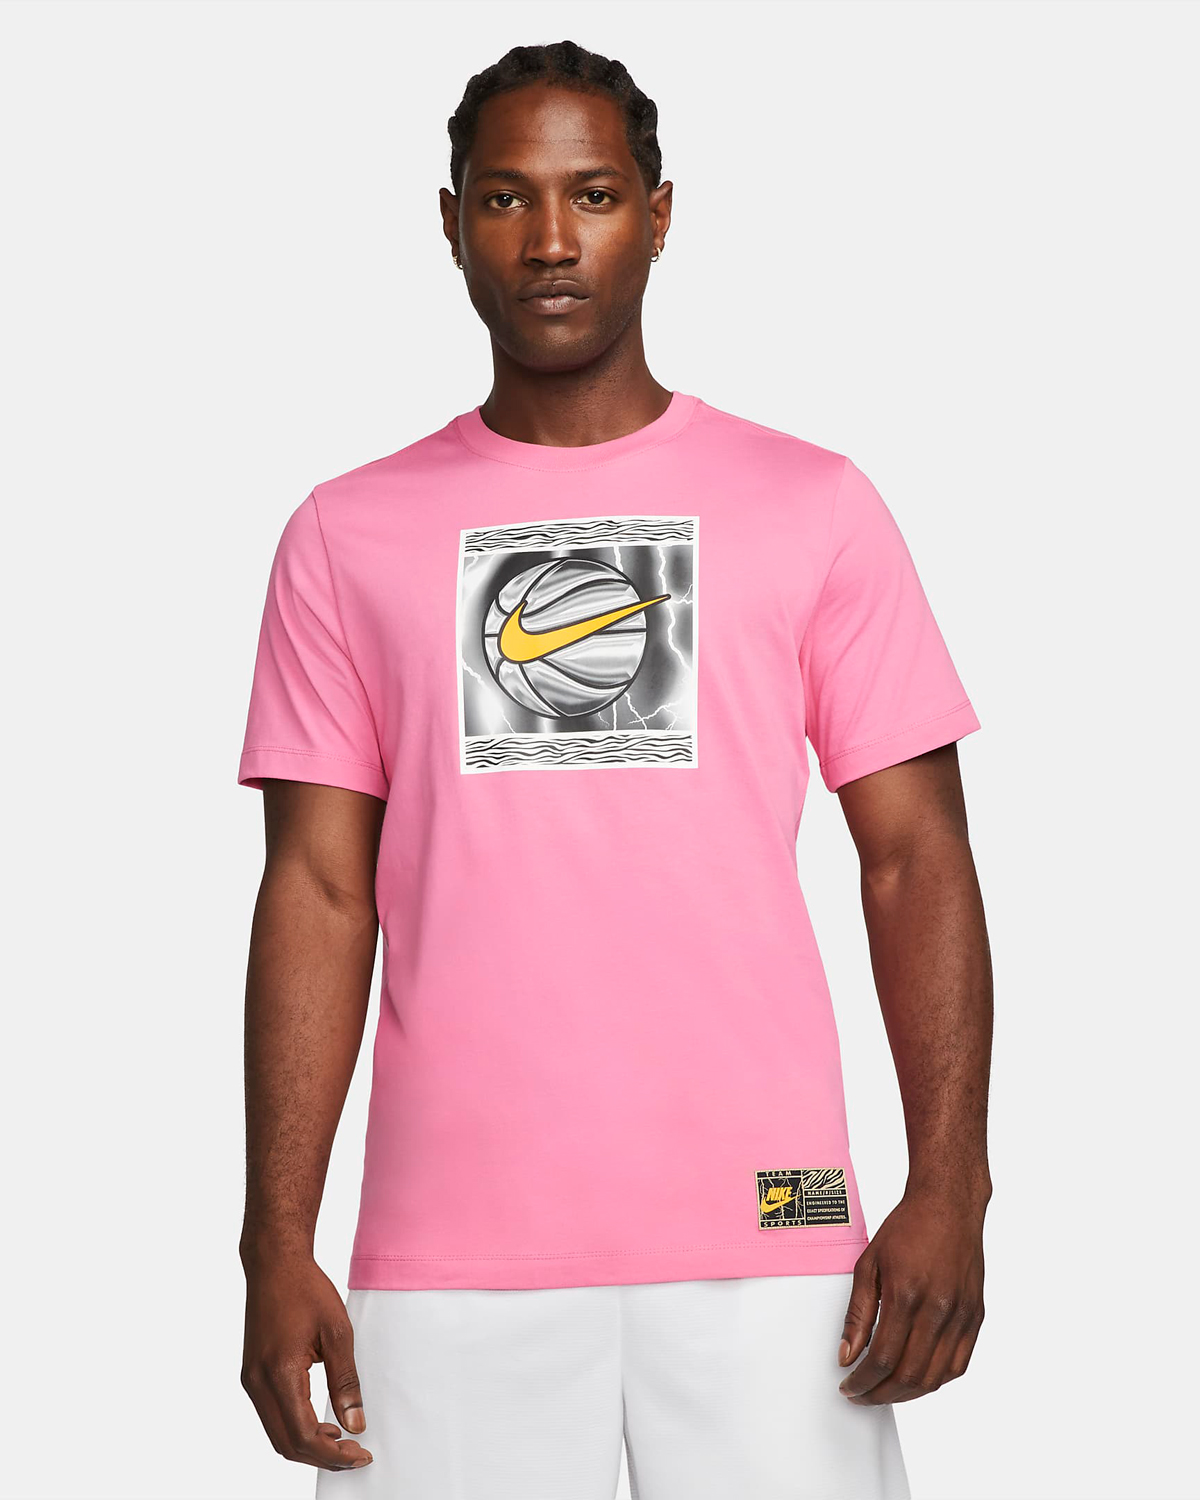 Nike KD 15 Aunt Pearl Shirts Clothing and Matching Outfits